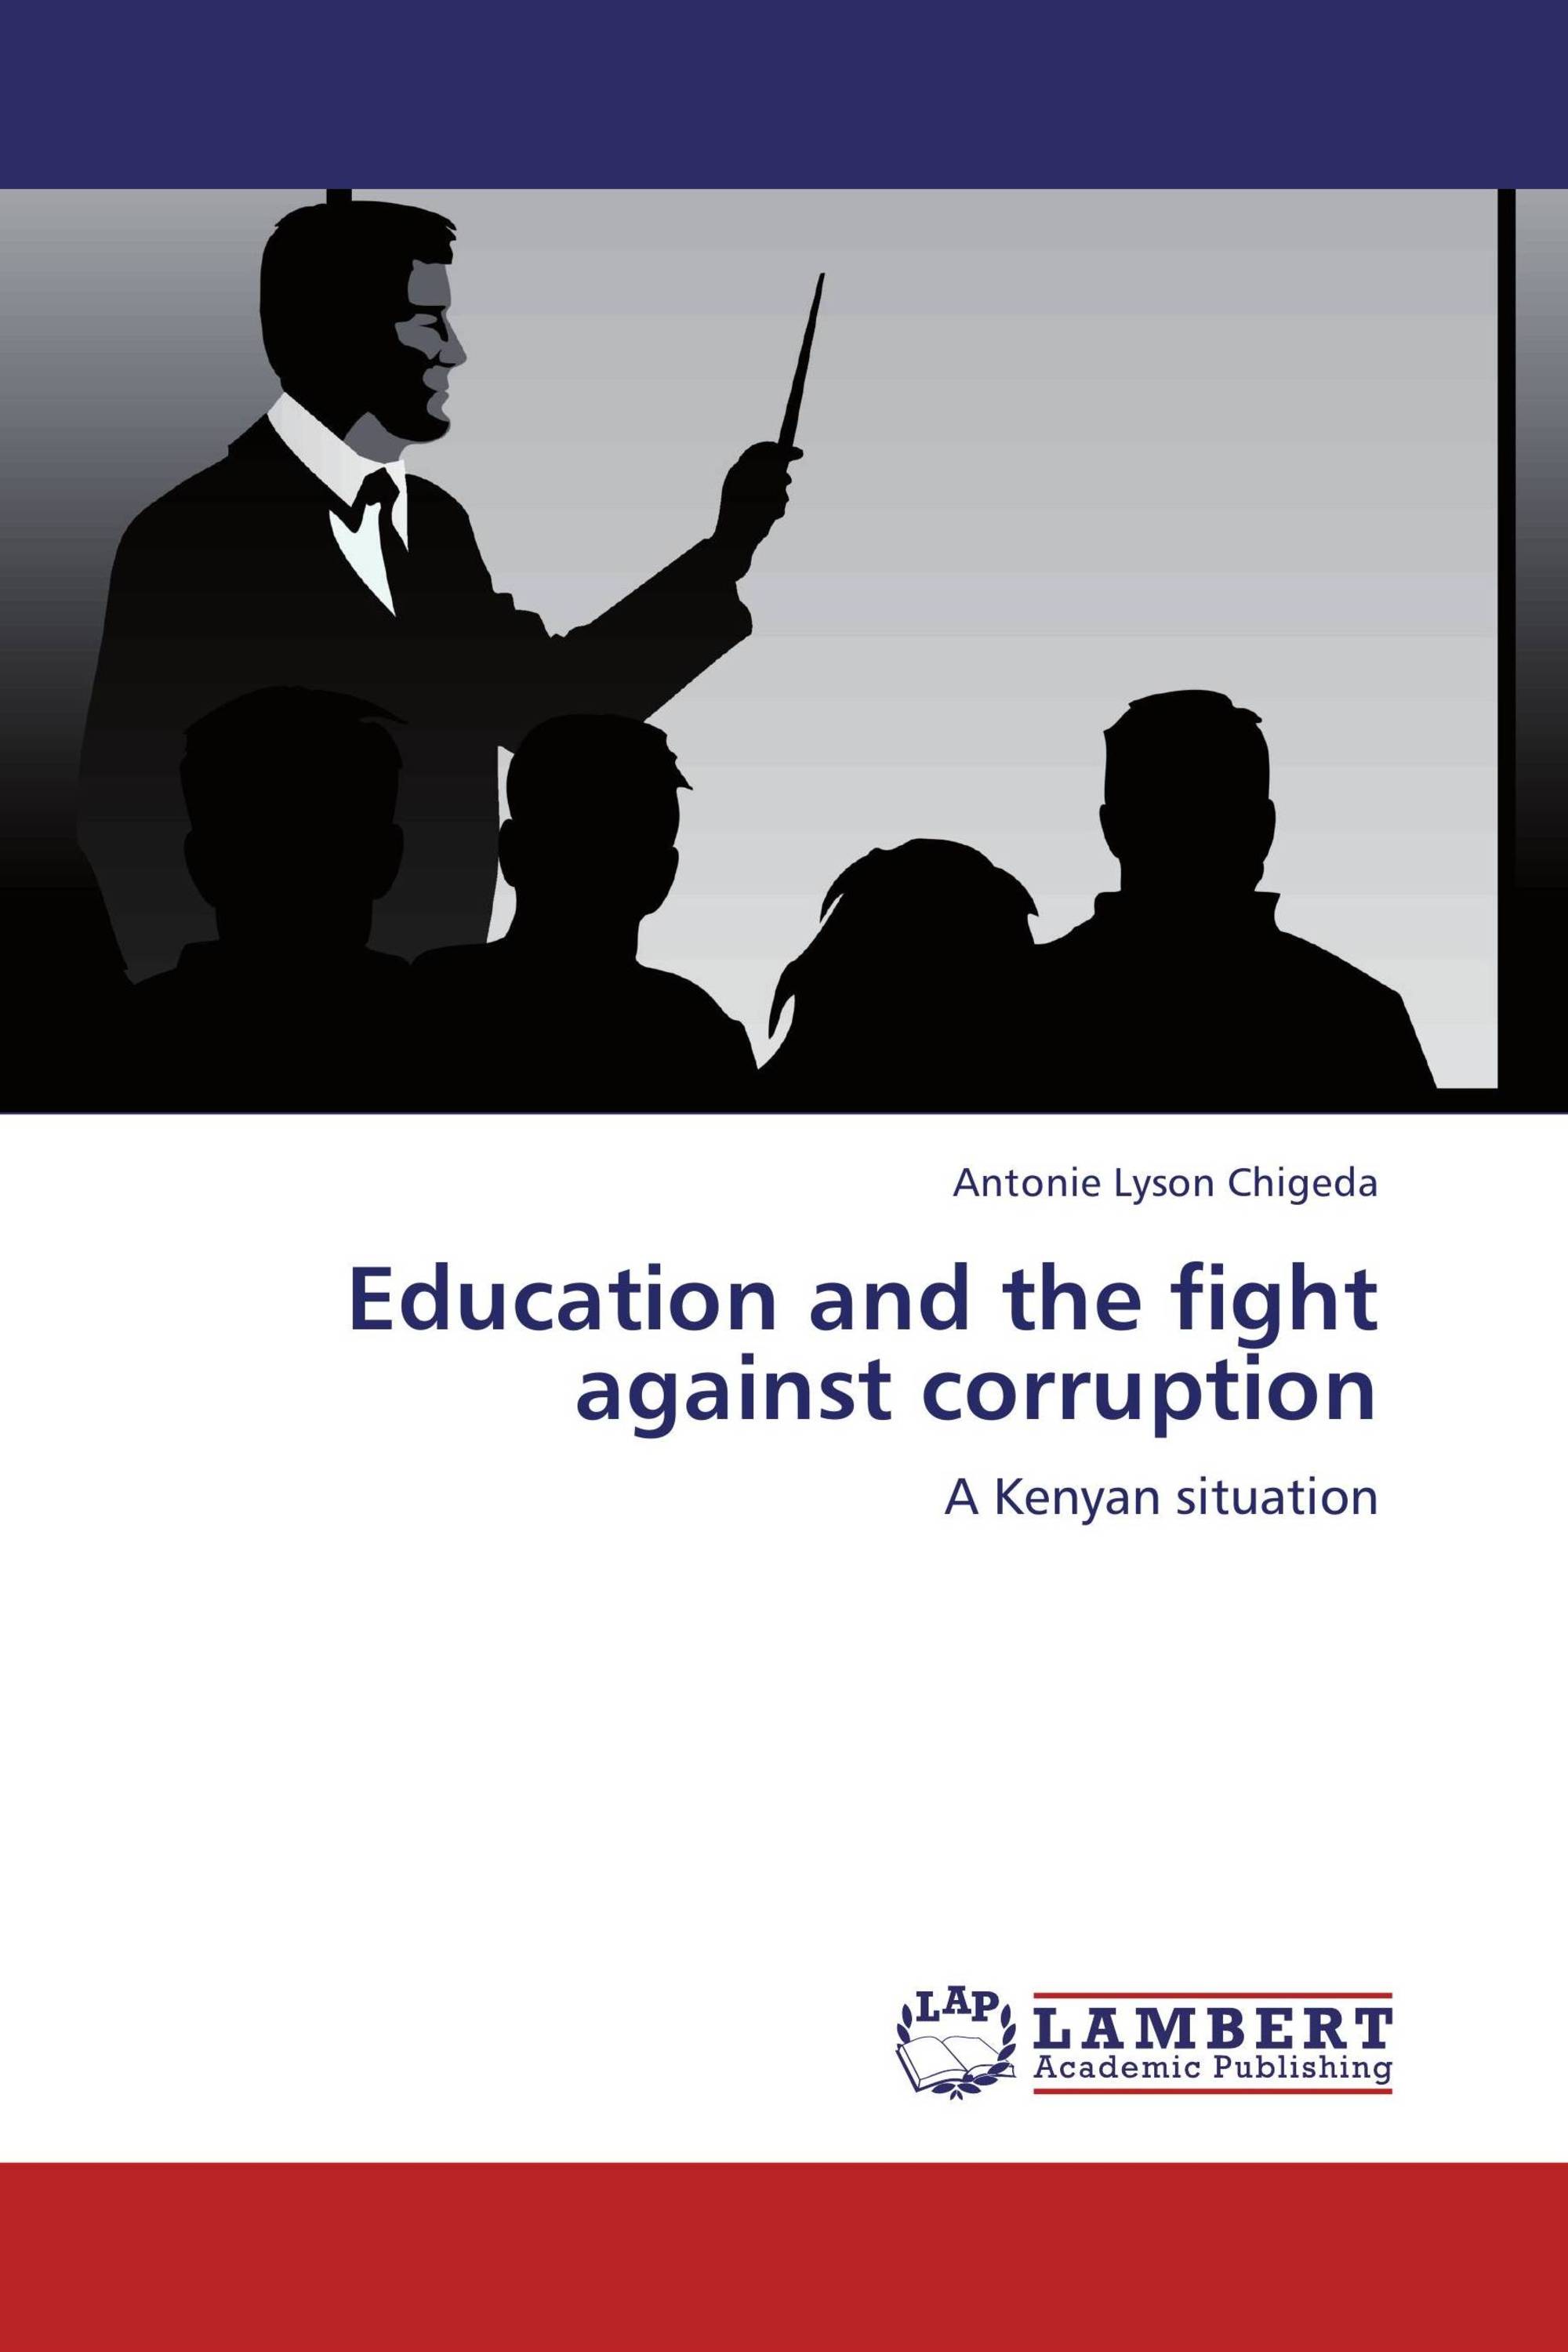 role of education in combating corruption essay writing